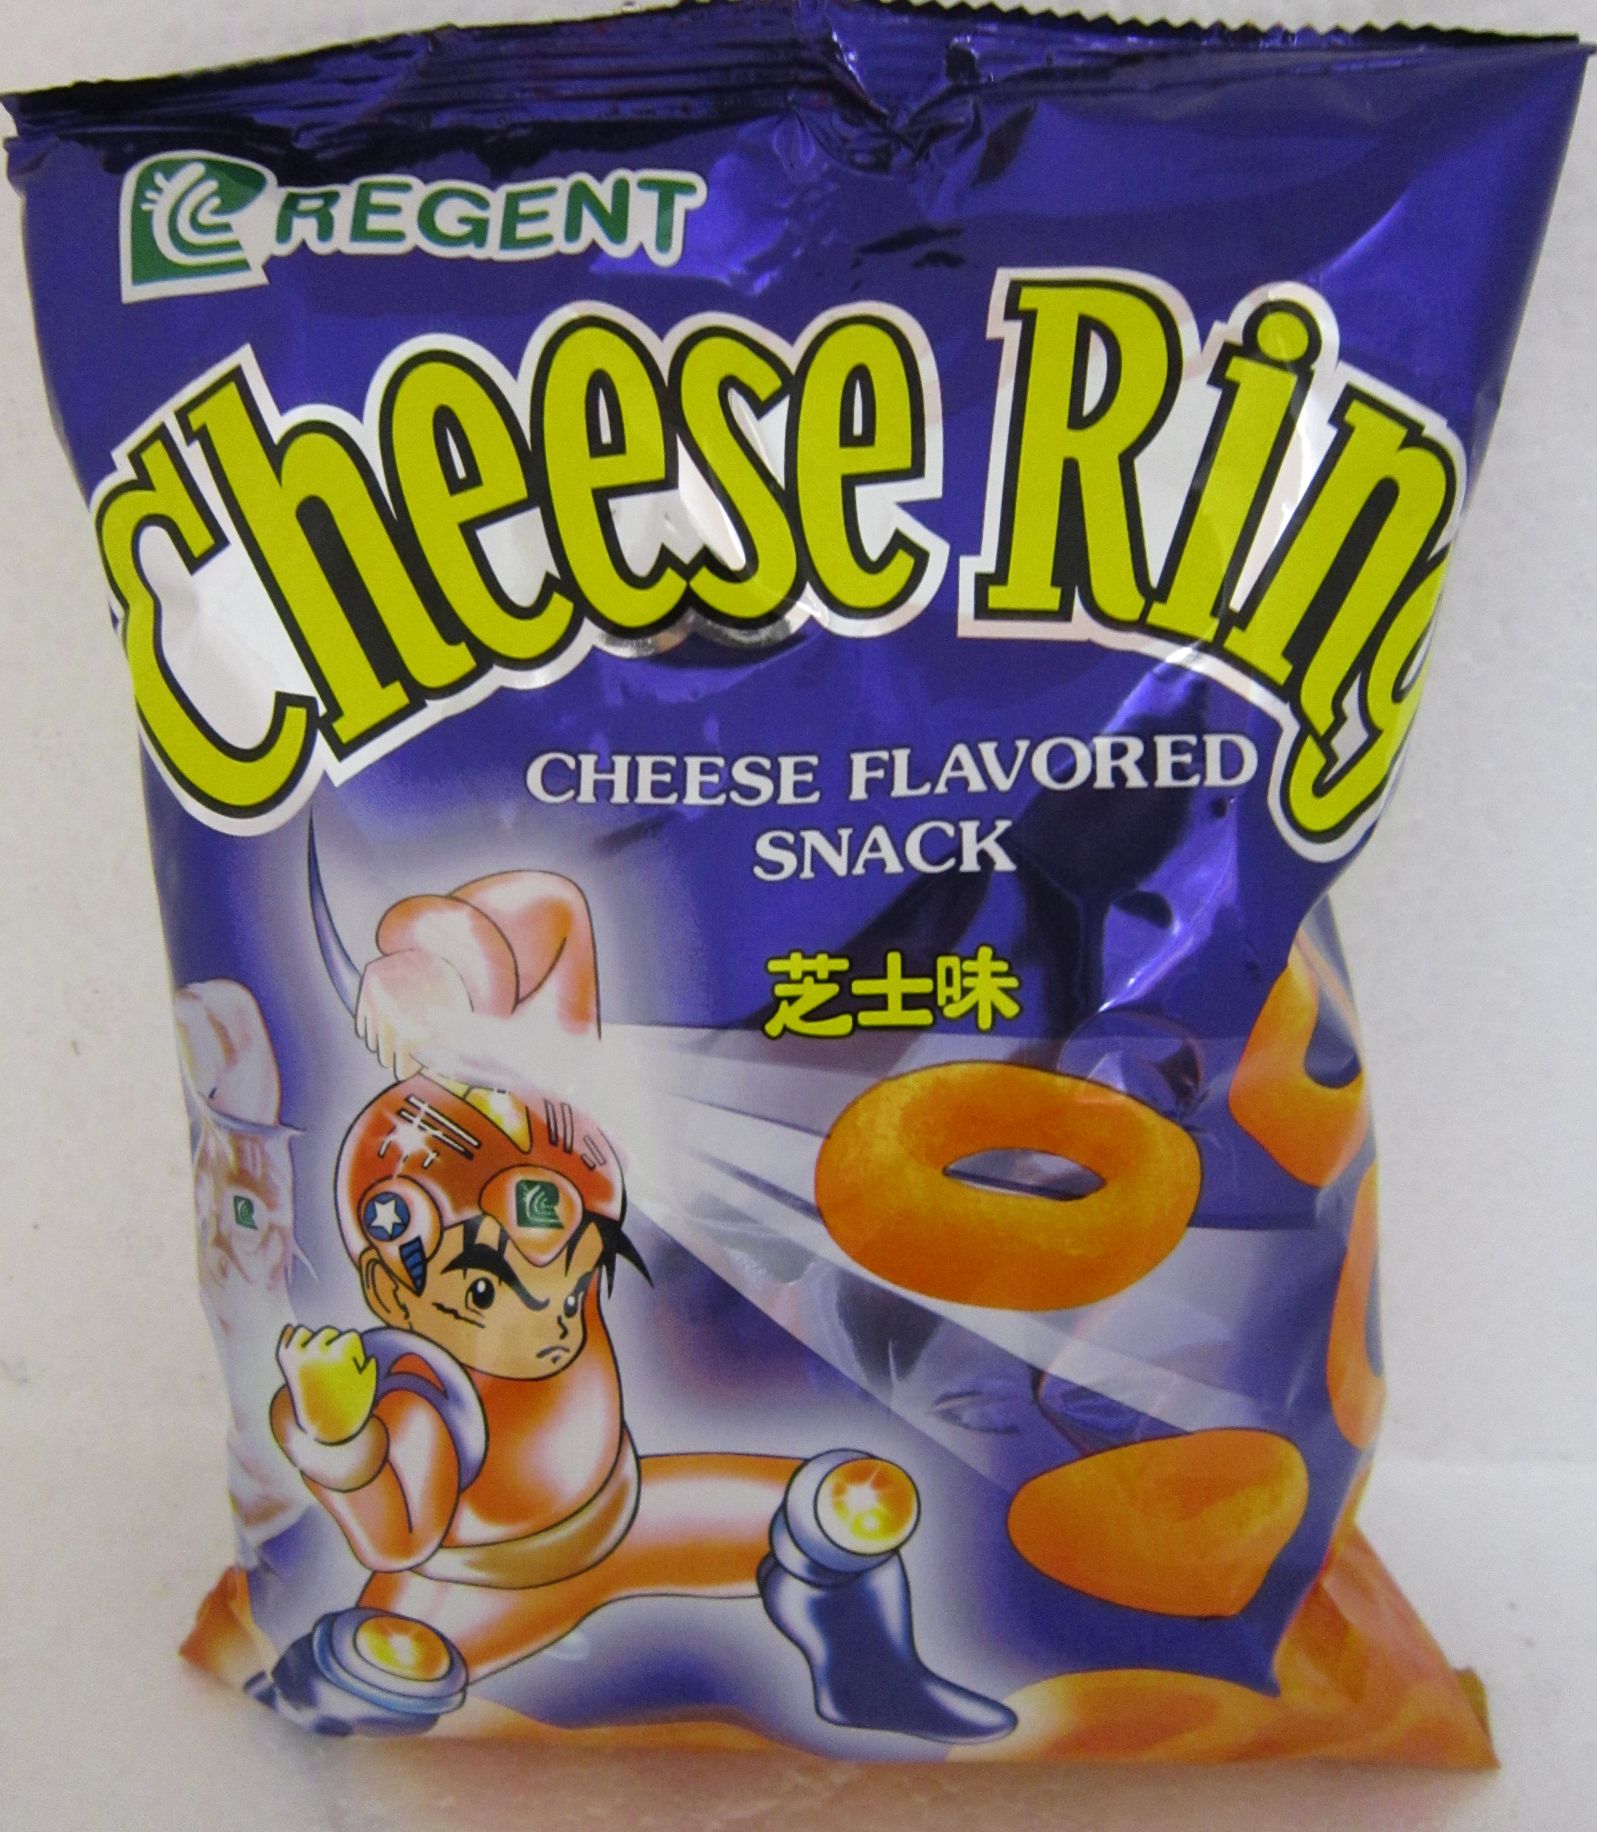 Regent Cheese Ring Image